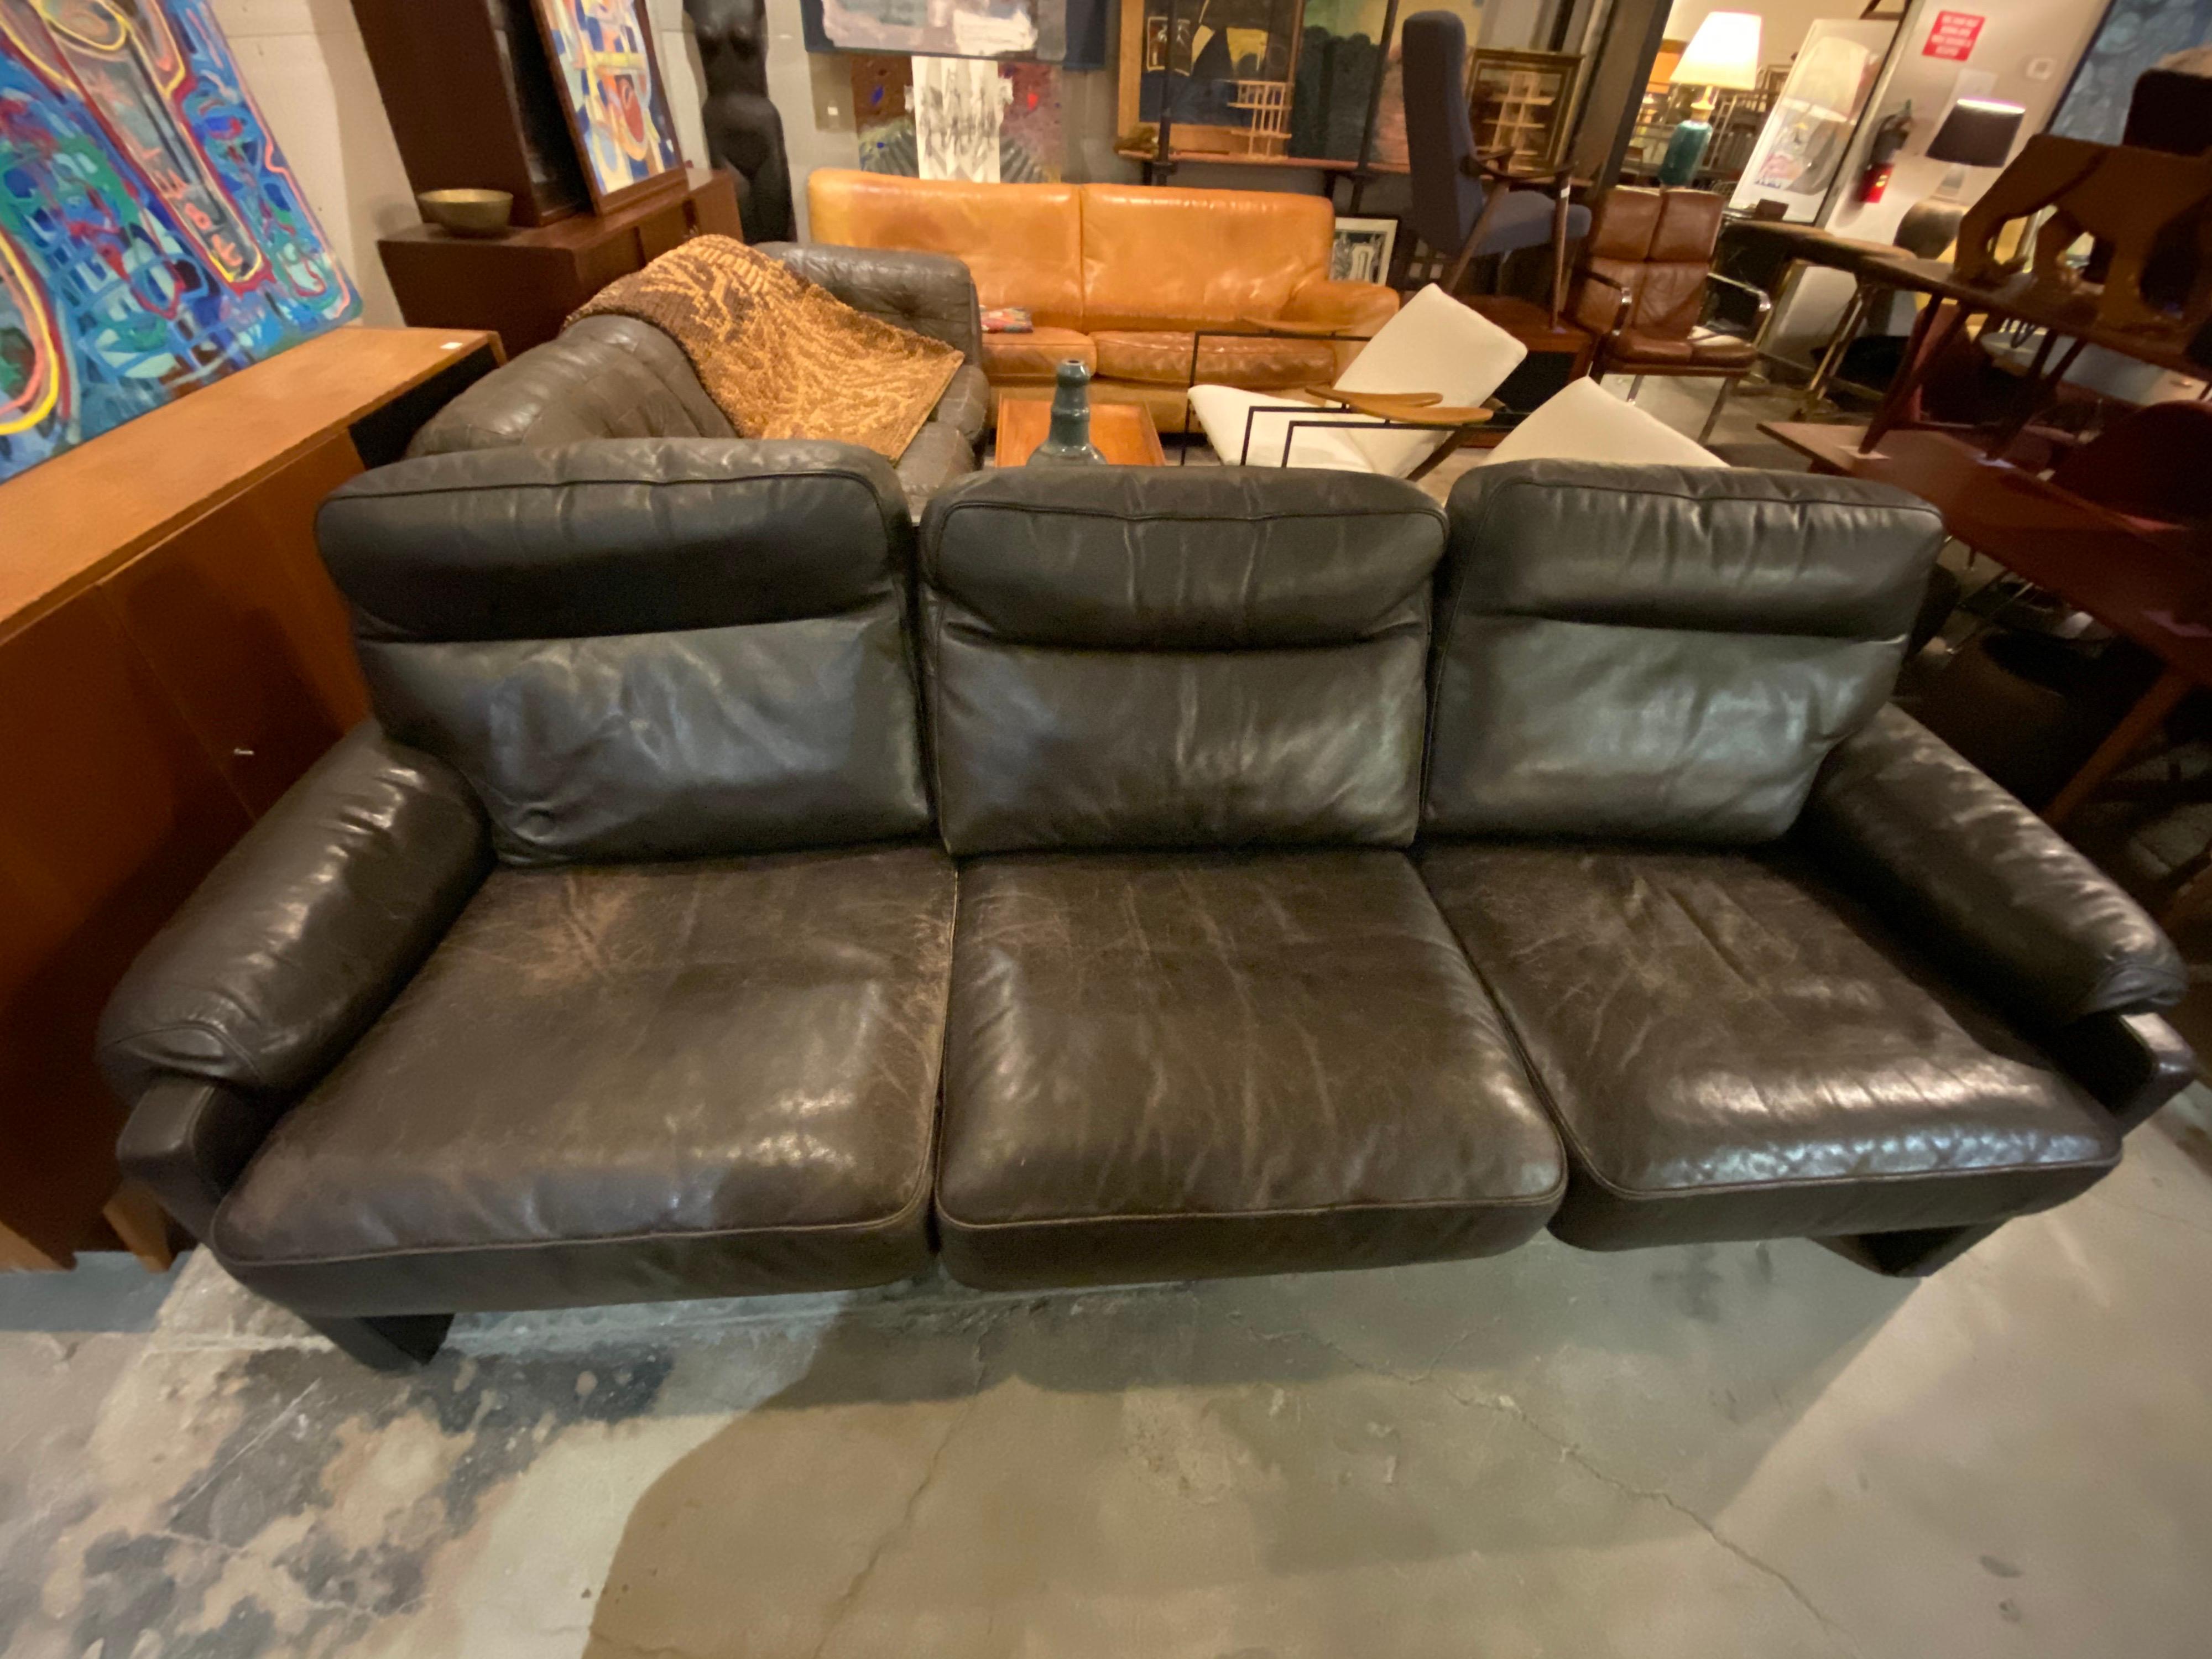 Beautiful Mid-Century Modern De Sede DS-70 sofa in a dark rich brown color (almost black) with patina, circa 1970s, Switzerland. De Sede is renowned for its high-quality, handcrafted luxurious leather furniture, and stunning aesthetics.